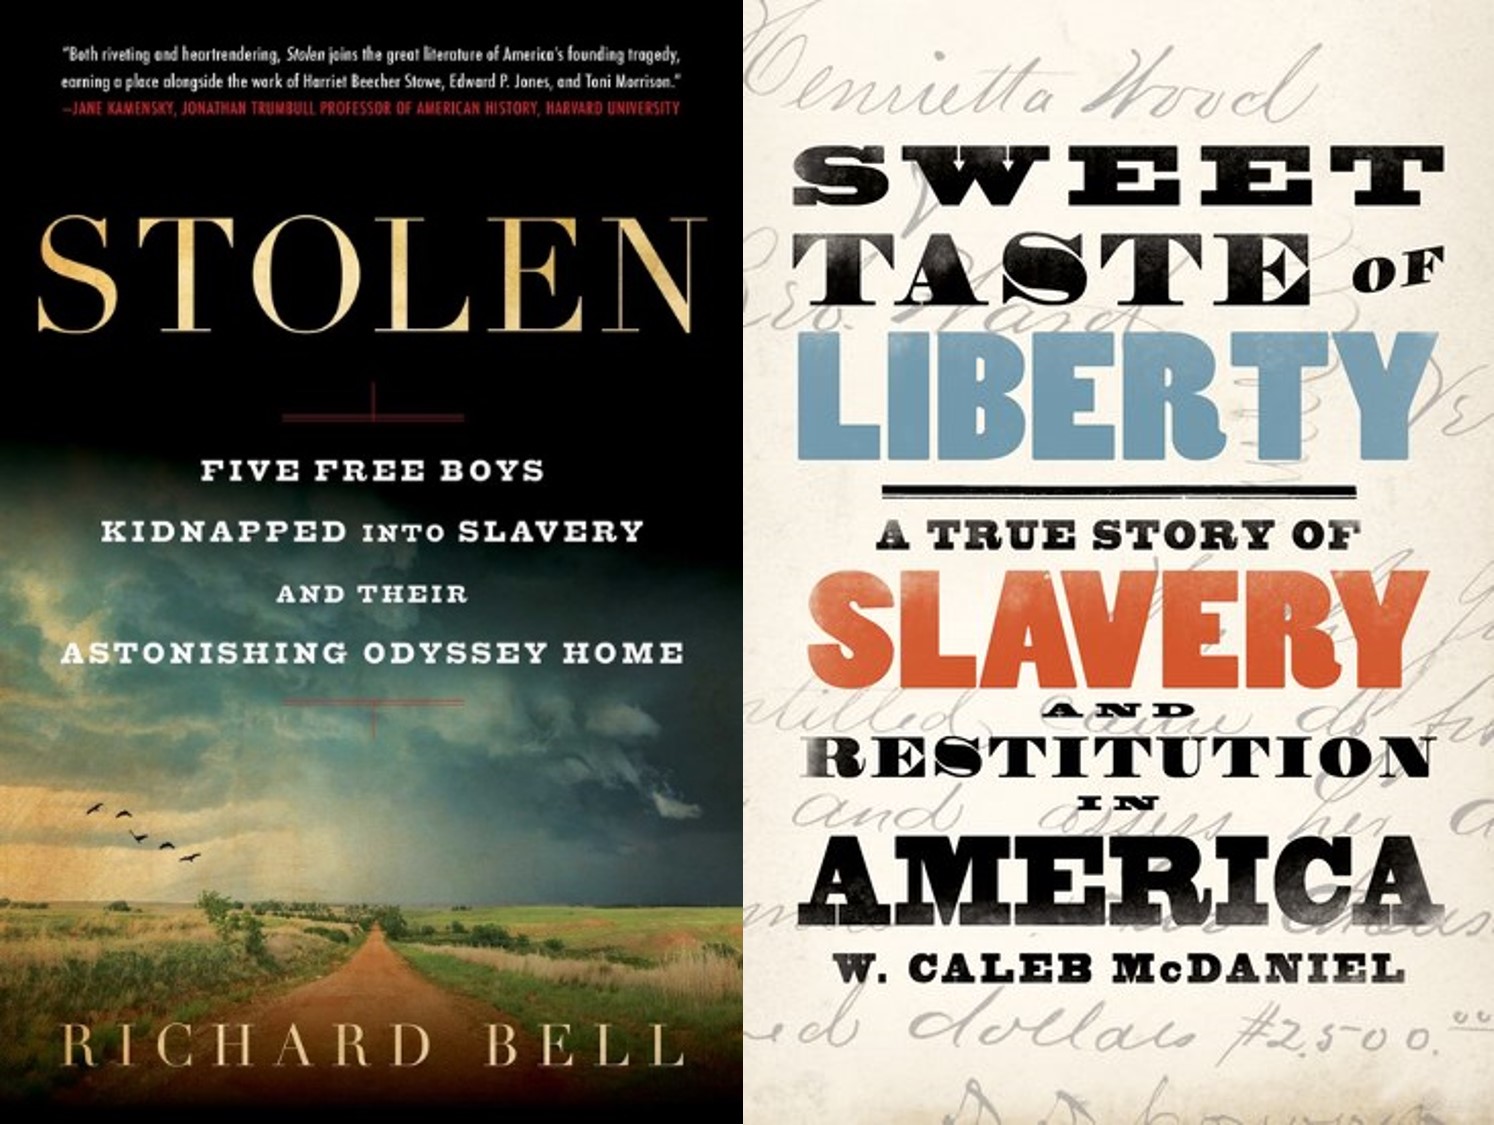 Image for event - Kidnapping, Slavery, and Justice :  A Conversation Celebrating Two New Books